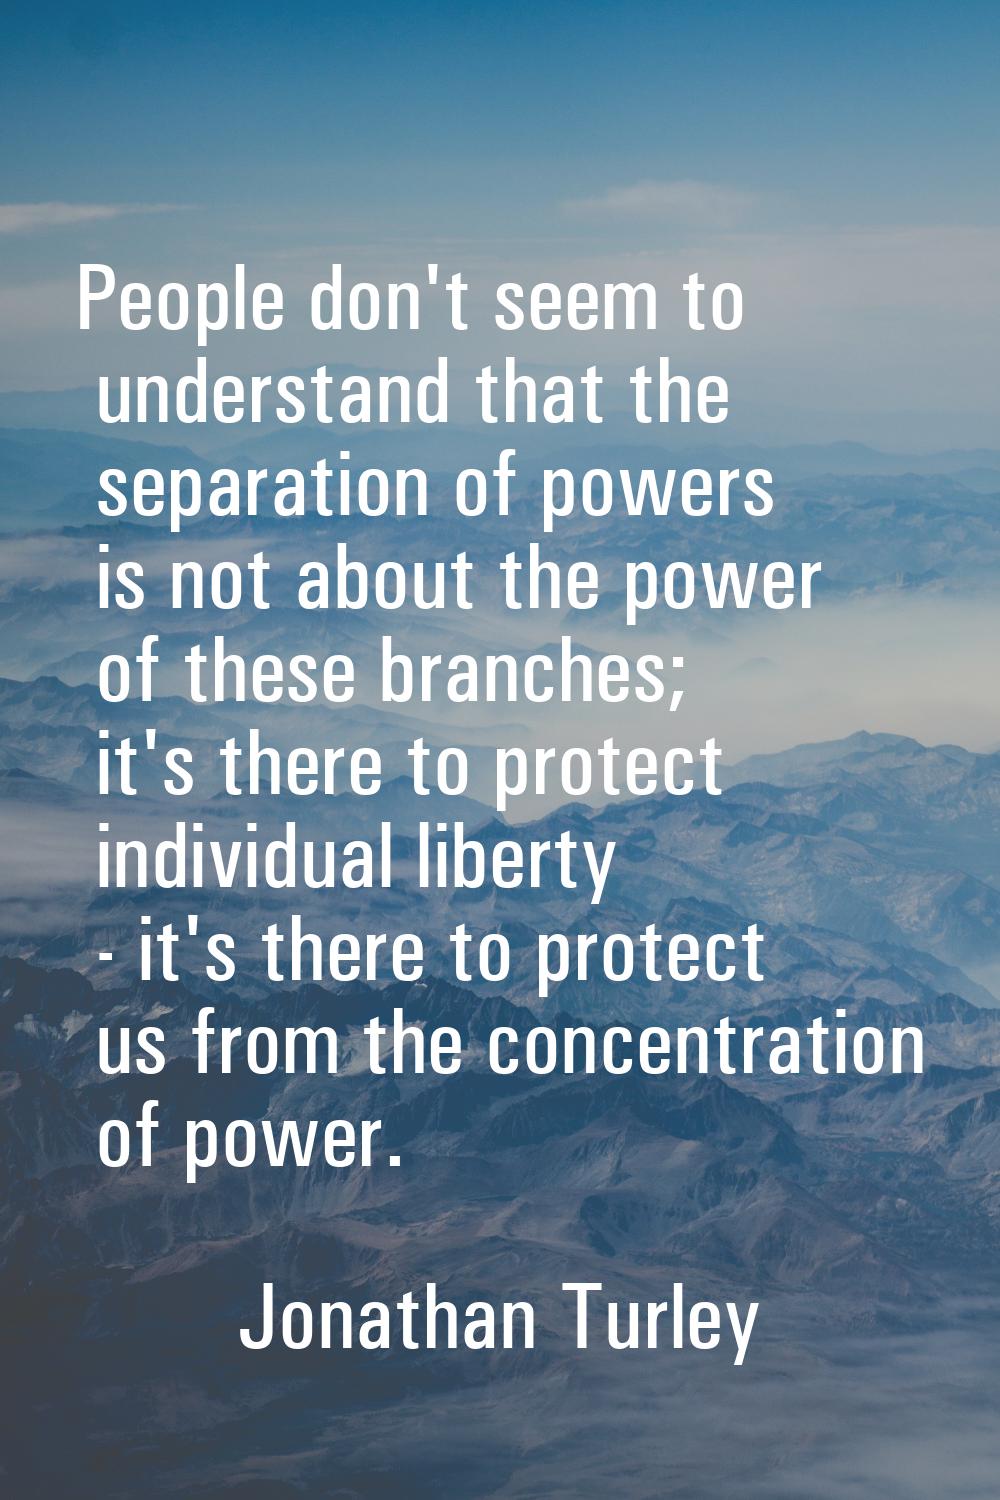 People don't seem to understand that the separation of powers is not about the power of these branc